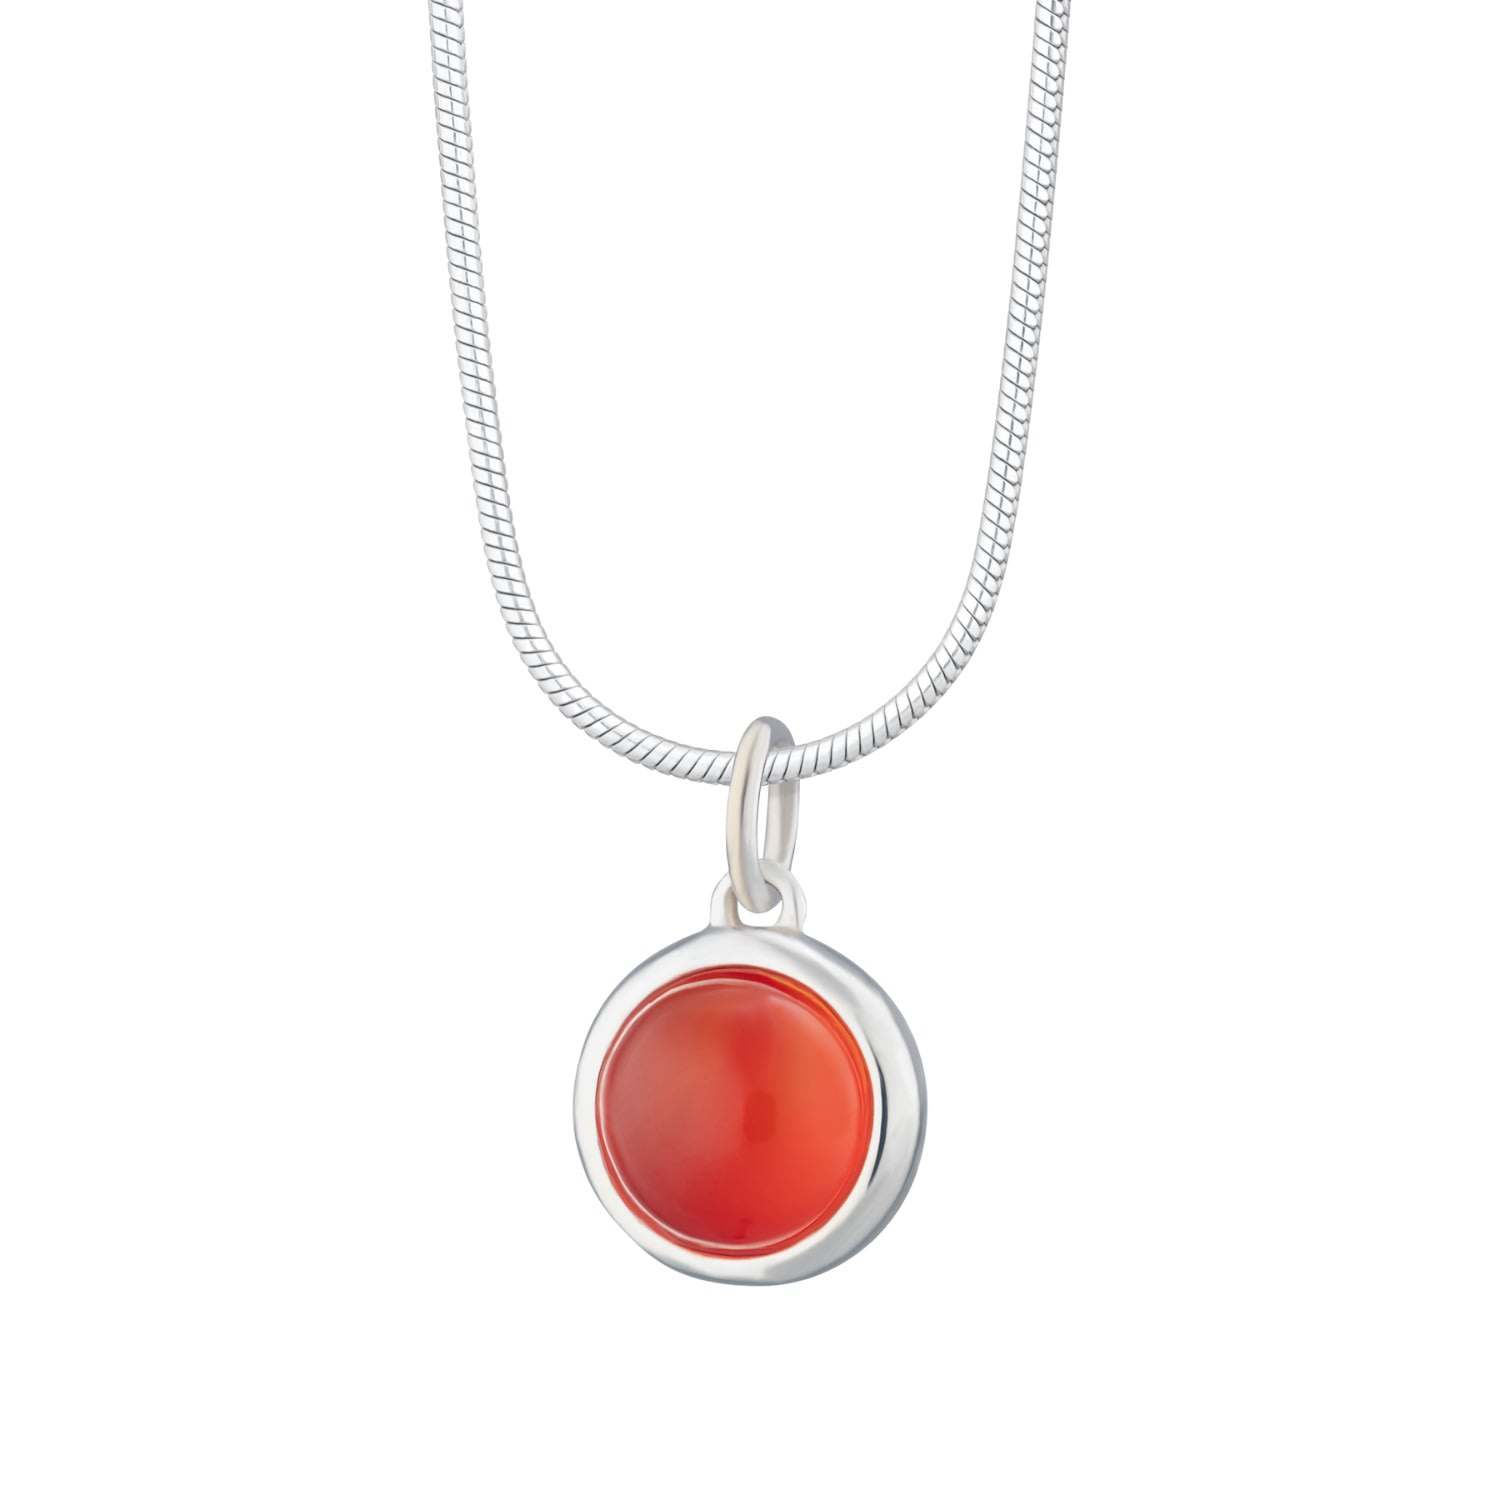 Lily Charmed Women's Sterling Silver Orange Agate Touchstone Necklace With Slim Snake Chain - Harmony In Gray